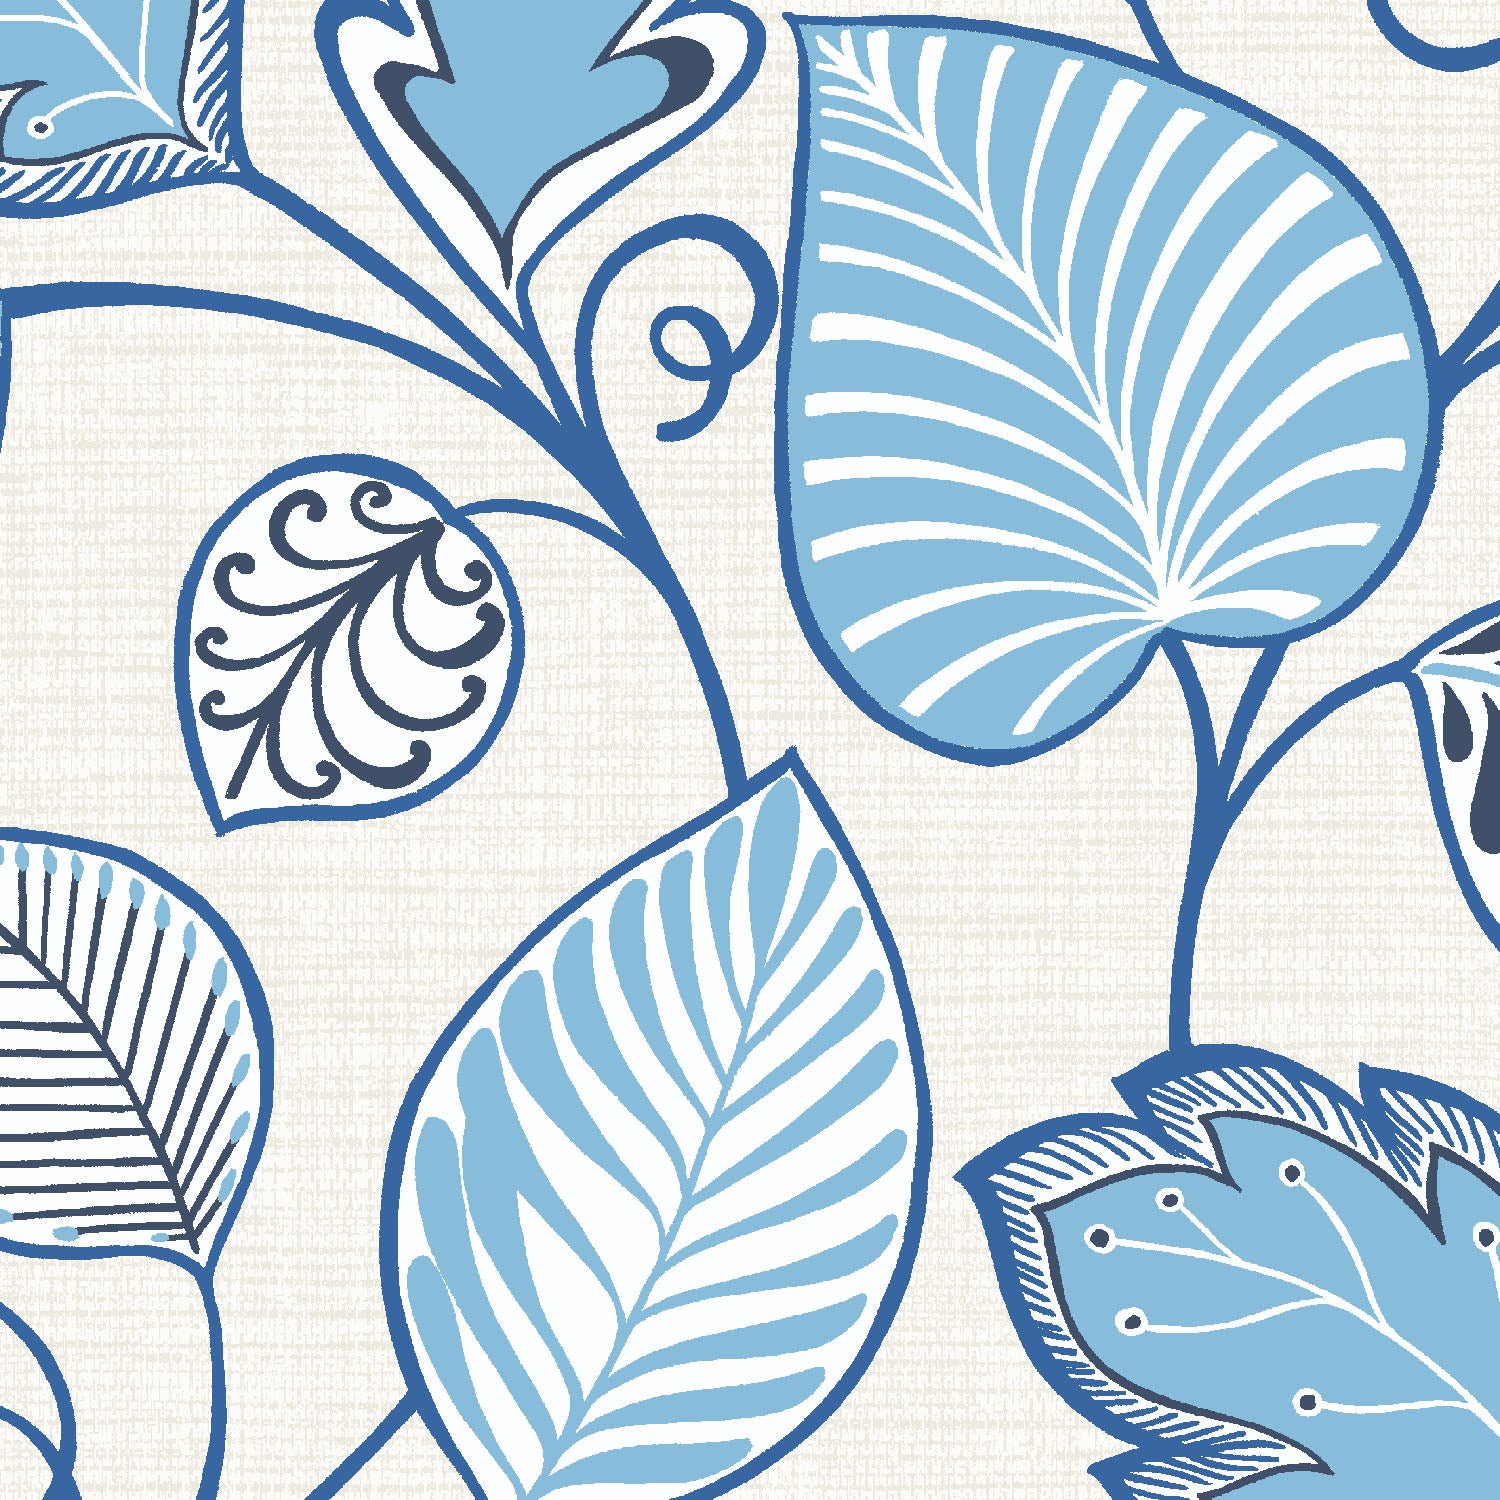 Waverly Inspirations Cotton Duck 54" Fantasy Island Blue Color Sewing Fabric by the Yard